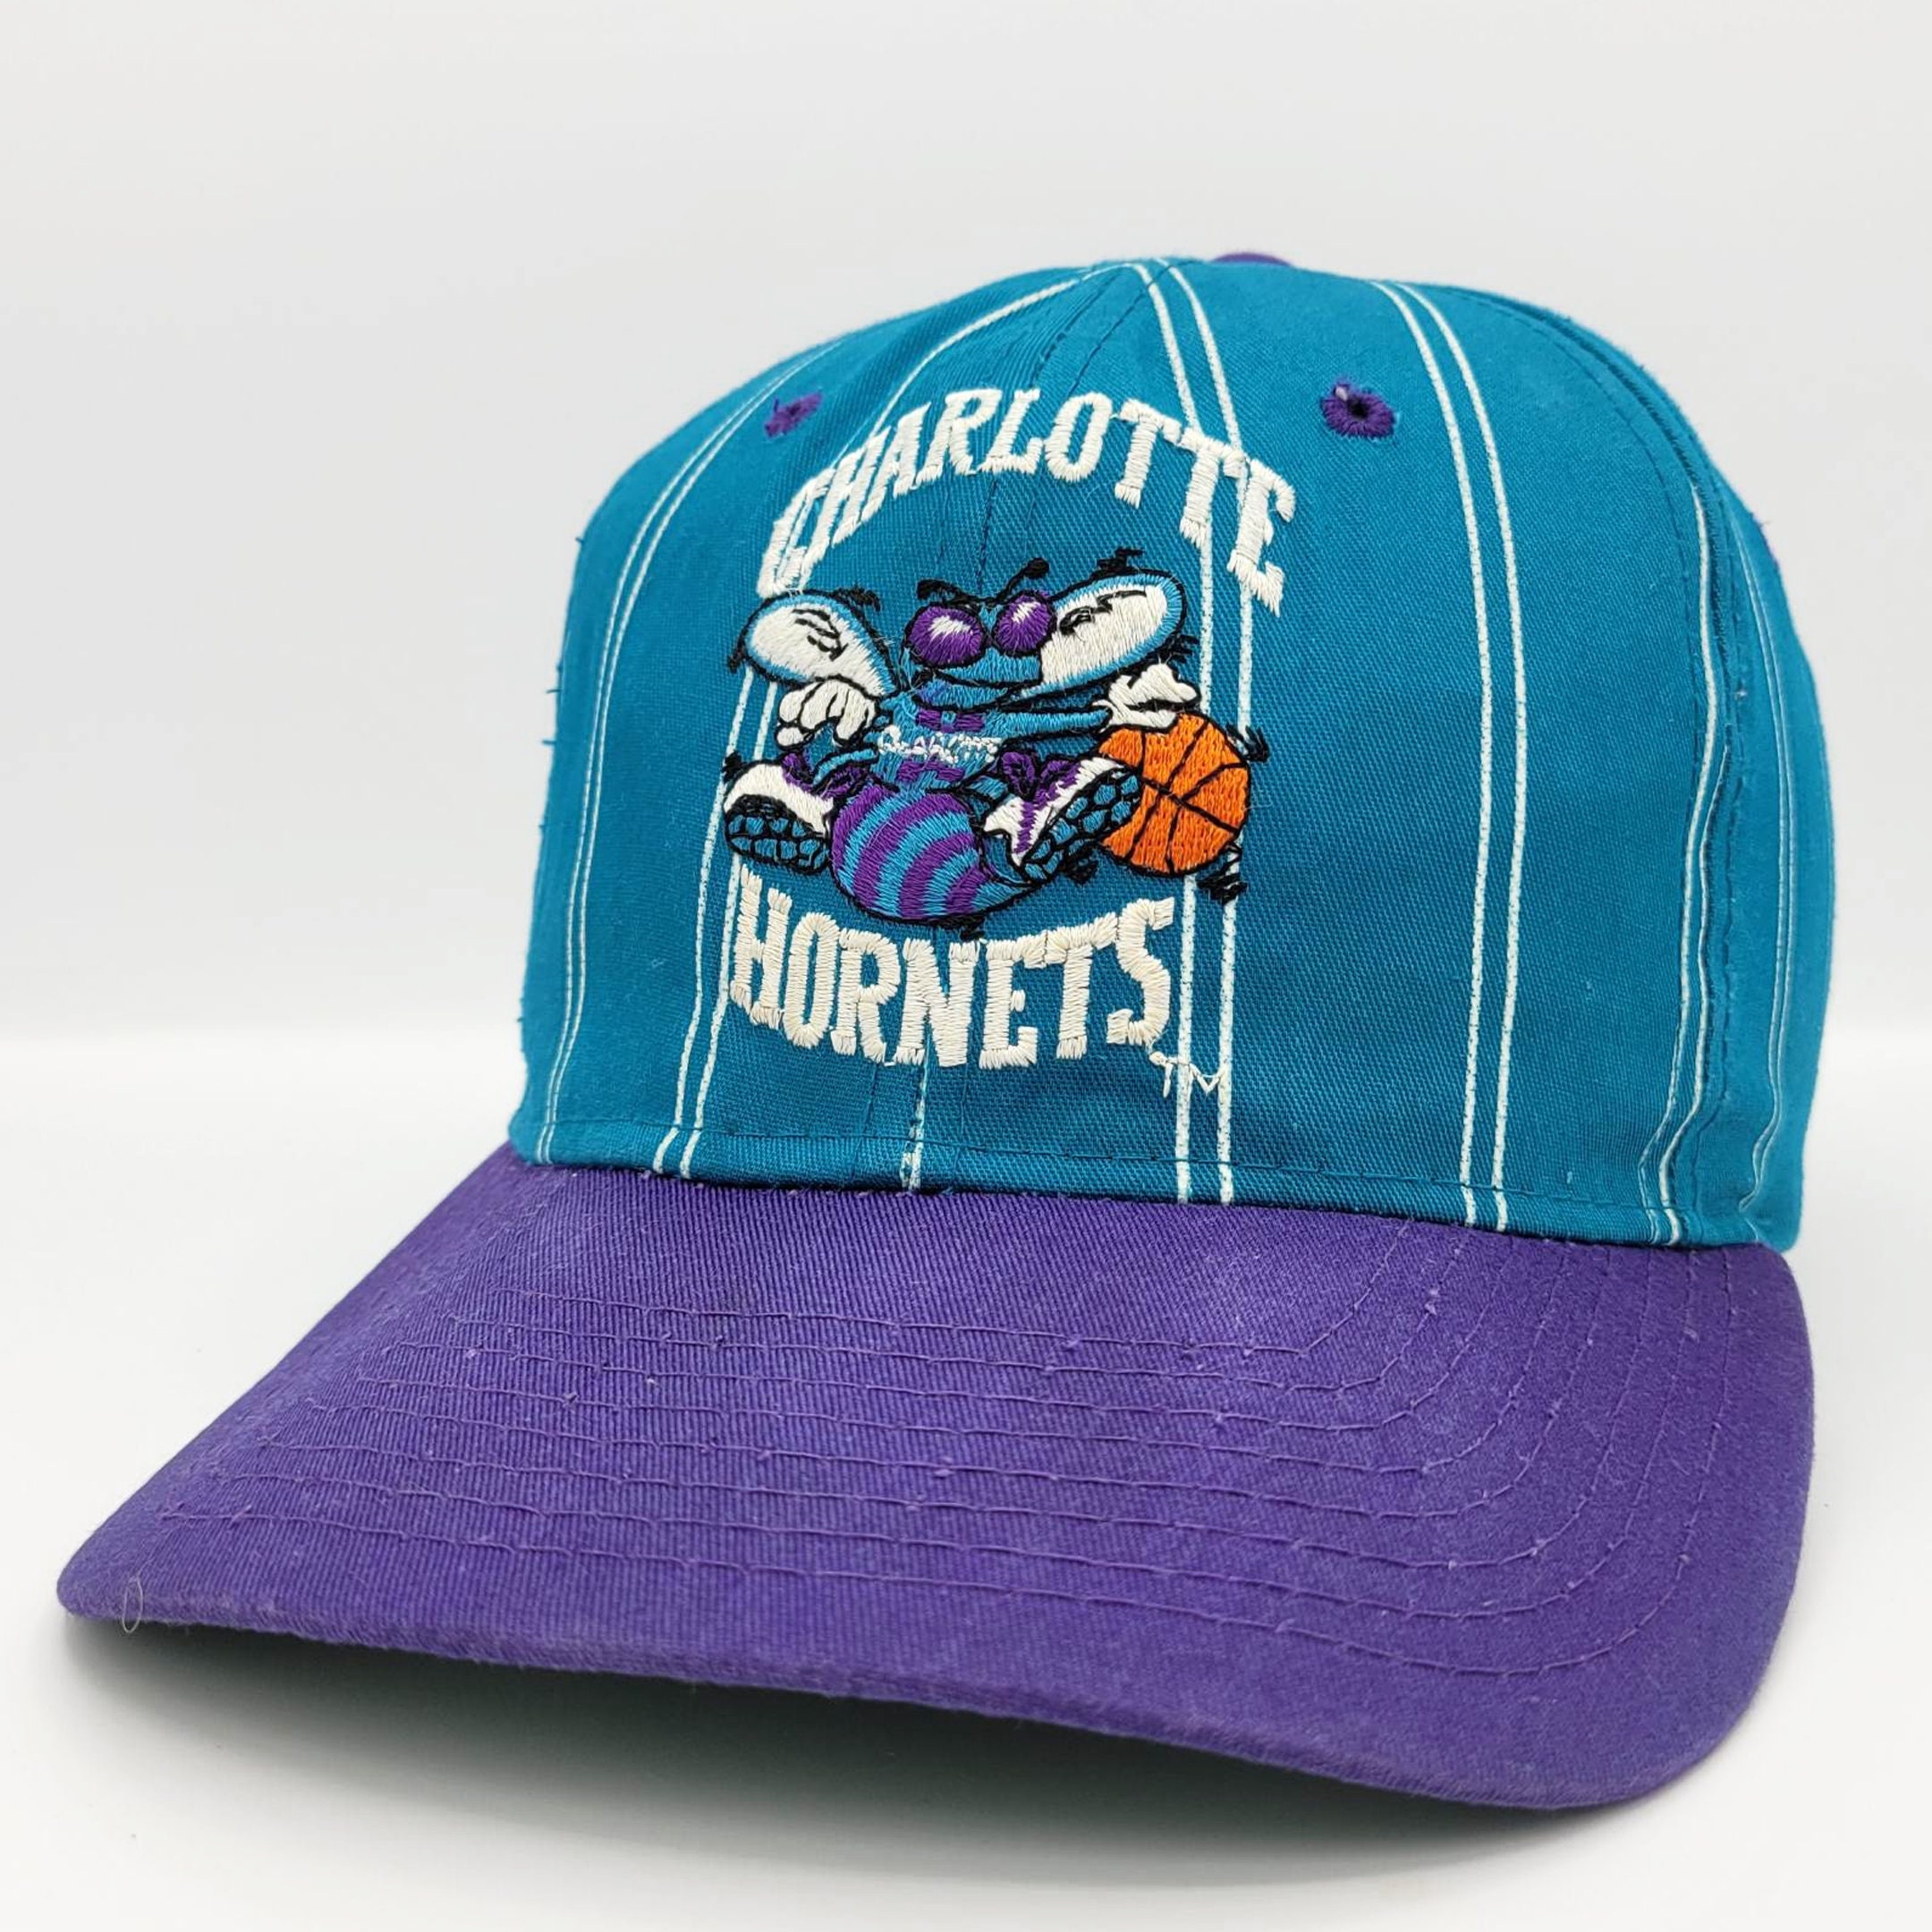 BRAND NEW w/ Tags Charlotte Hornets New Era Bucket Hat - Size Large / L